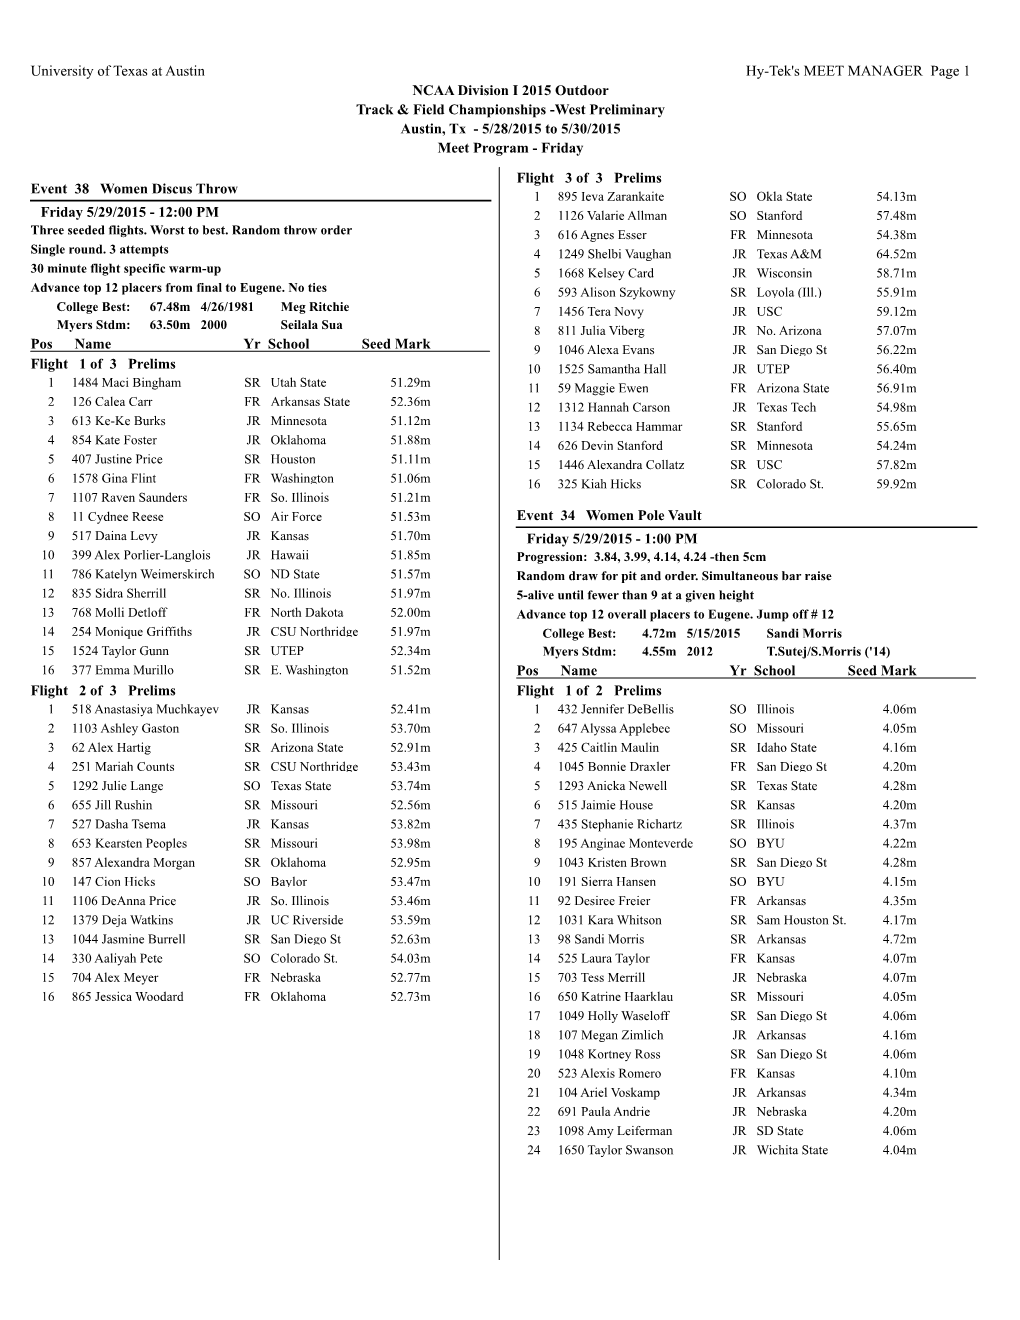 University of Texas at Austin Hy-Tek's MEET MANAGER Page 1 NCAA Division I 2015 Outdoor Track & Field Championships -West P